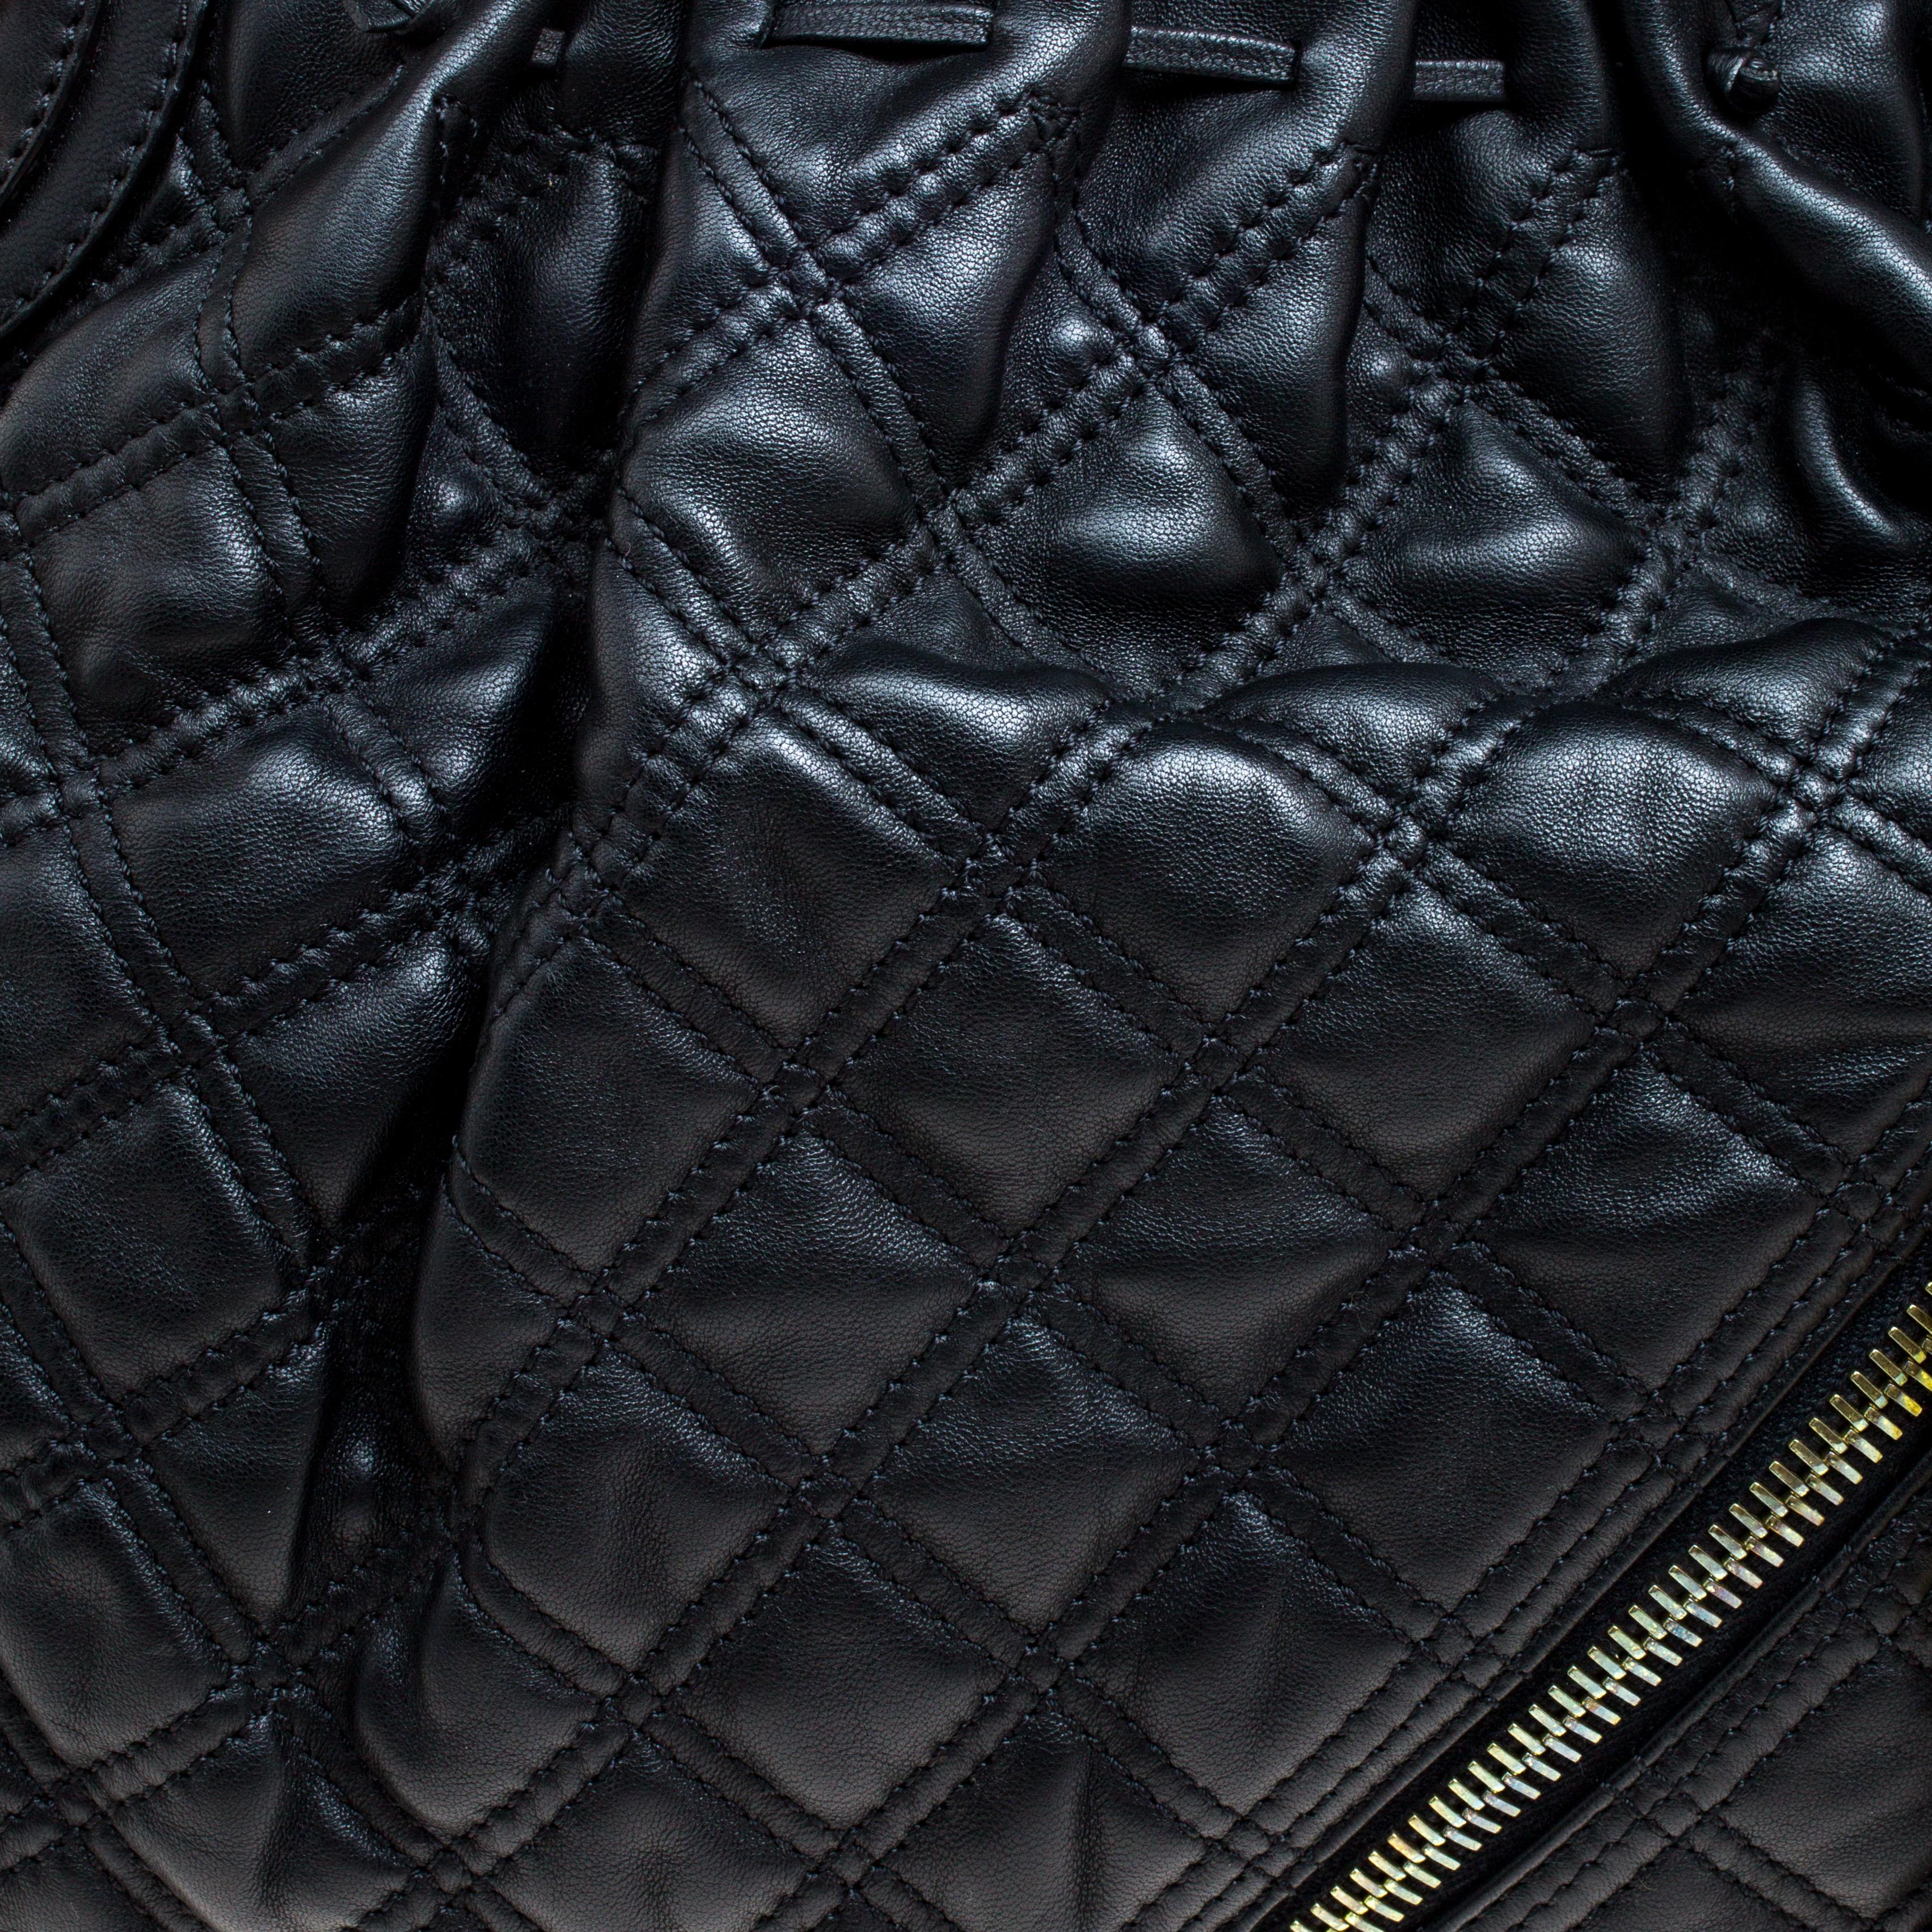 Marc Jacobs Black Quilted Leather Cecilia Satchel 1